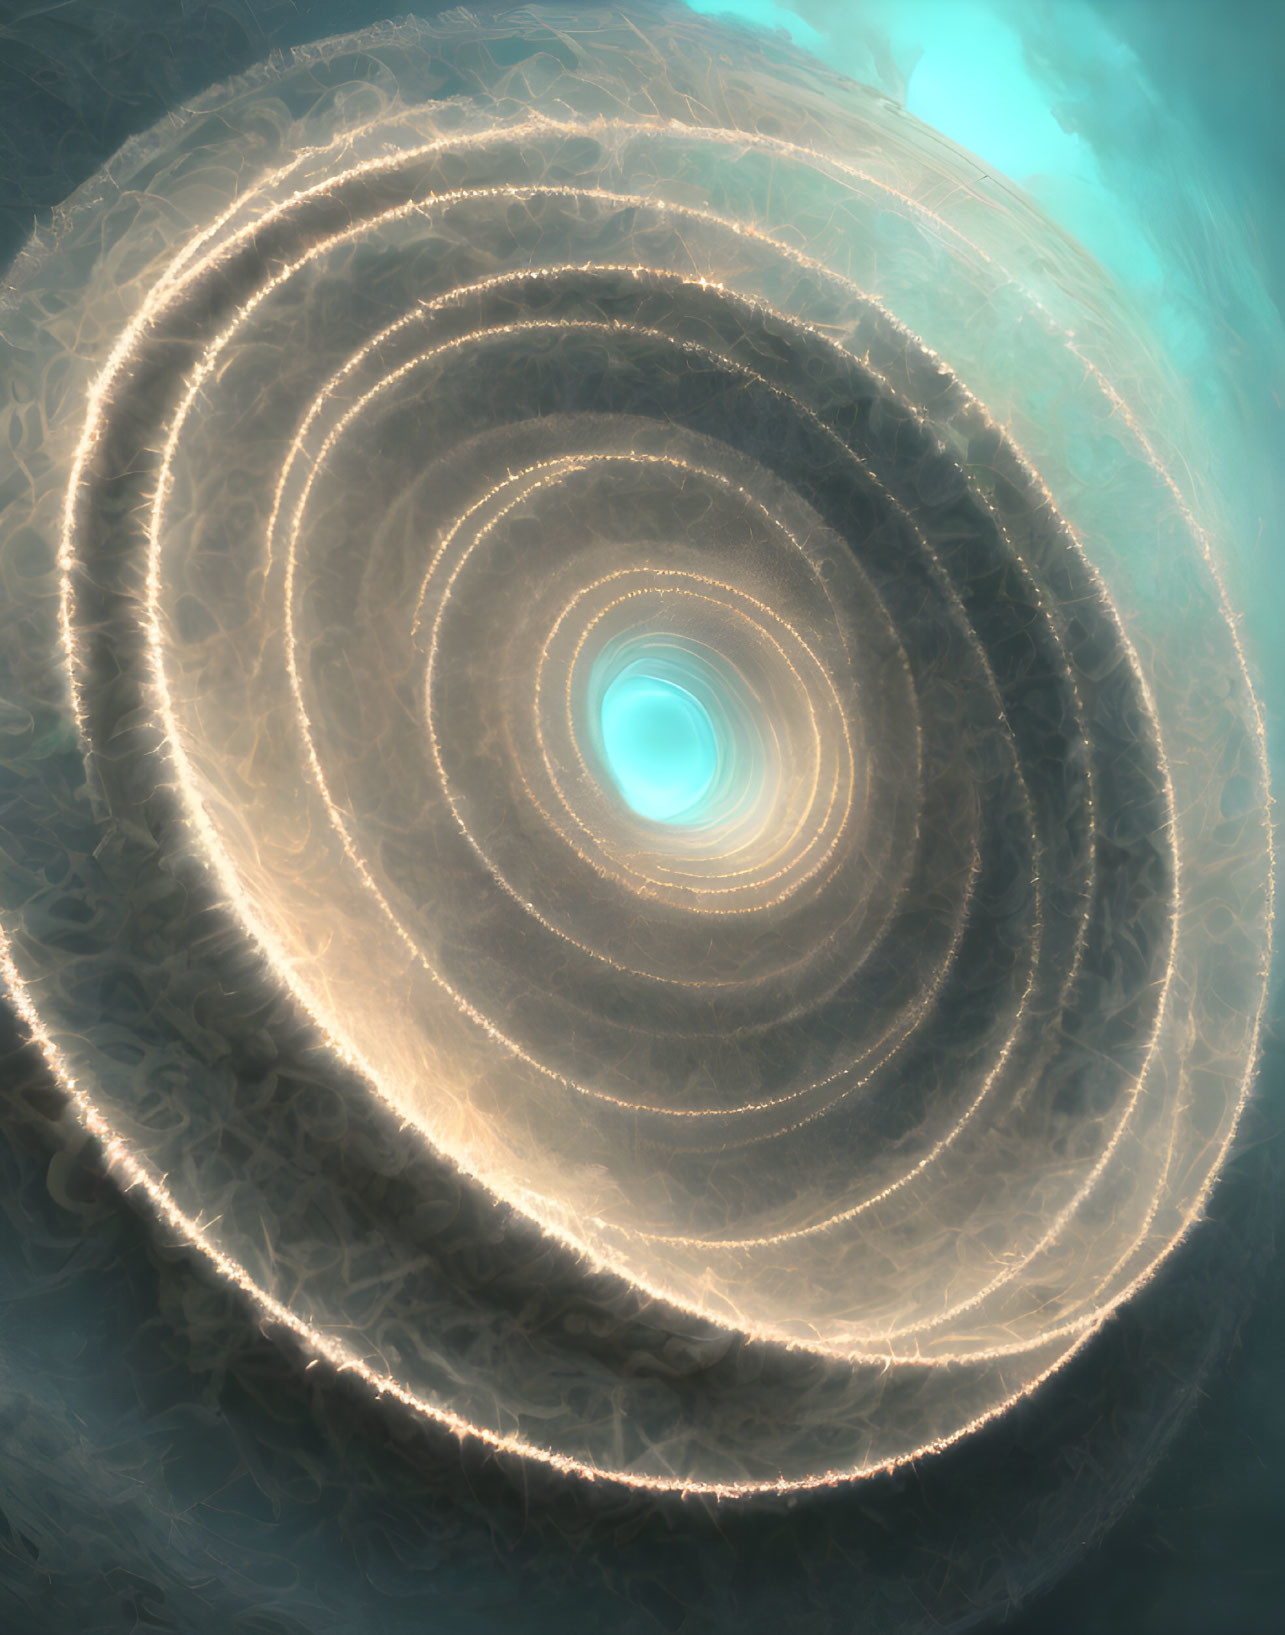 Digital Artwork: Cosmic Spiral Portal with Ethereal Clouds